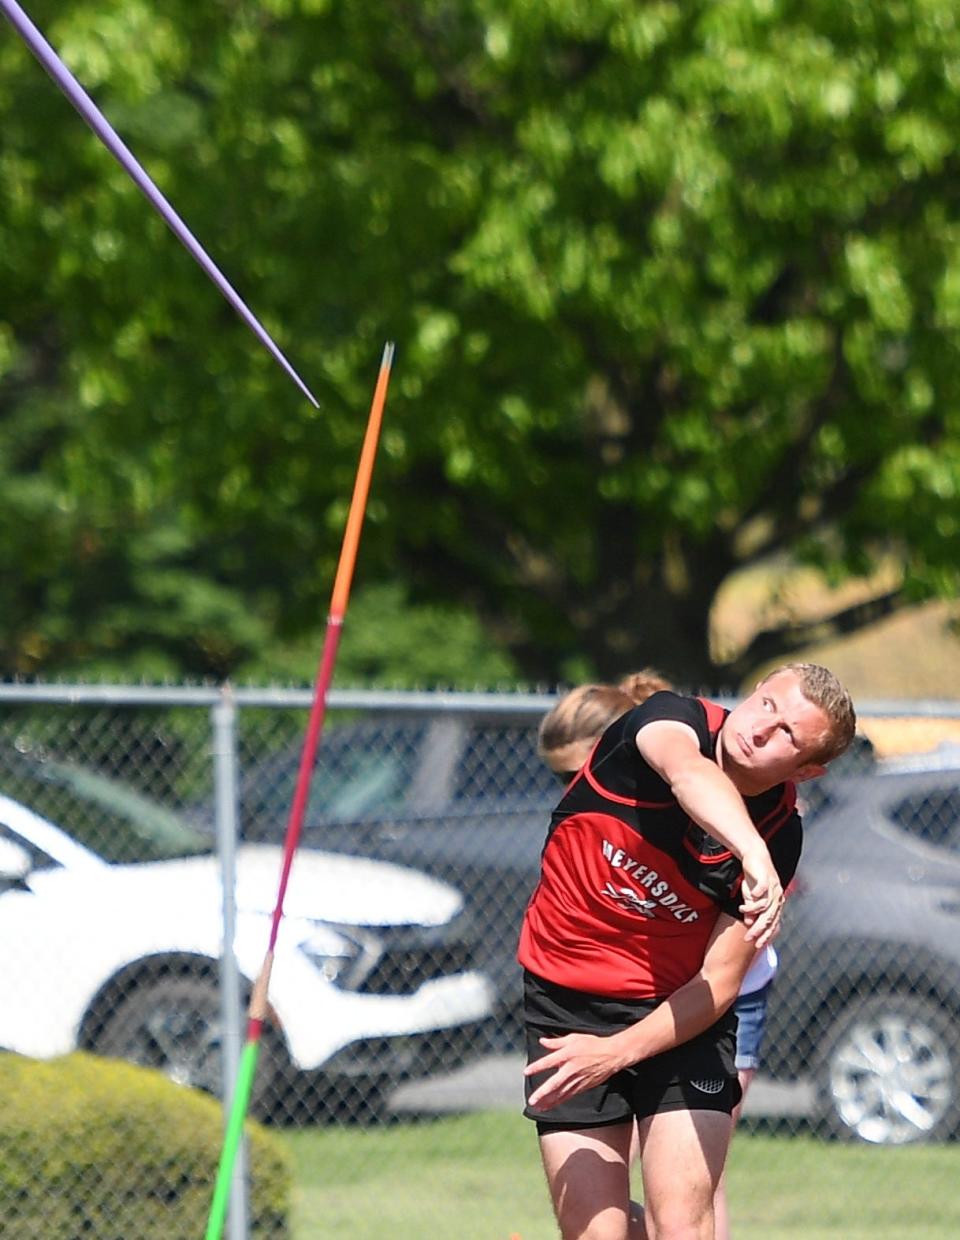 Meyersdale's Bryson Hetz competes in the boys javelin during the District 5 Class 2A Track and Field Championships, Wednesday, at Northern Bedford High School.